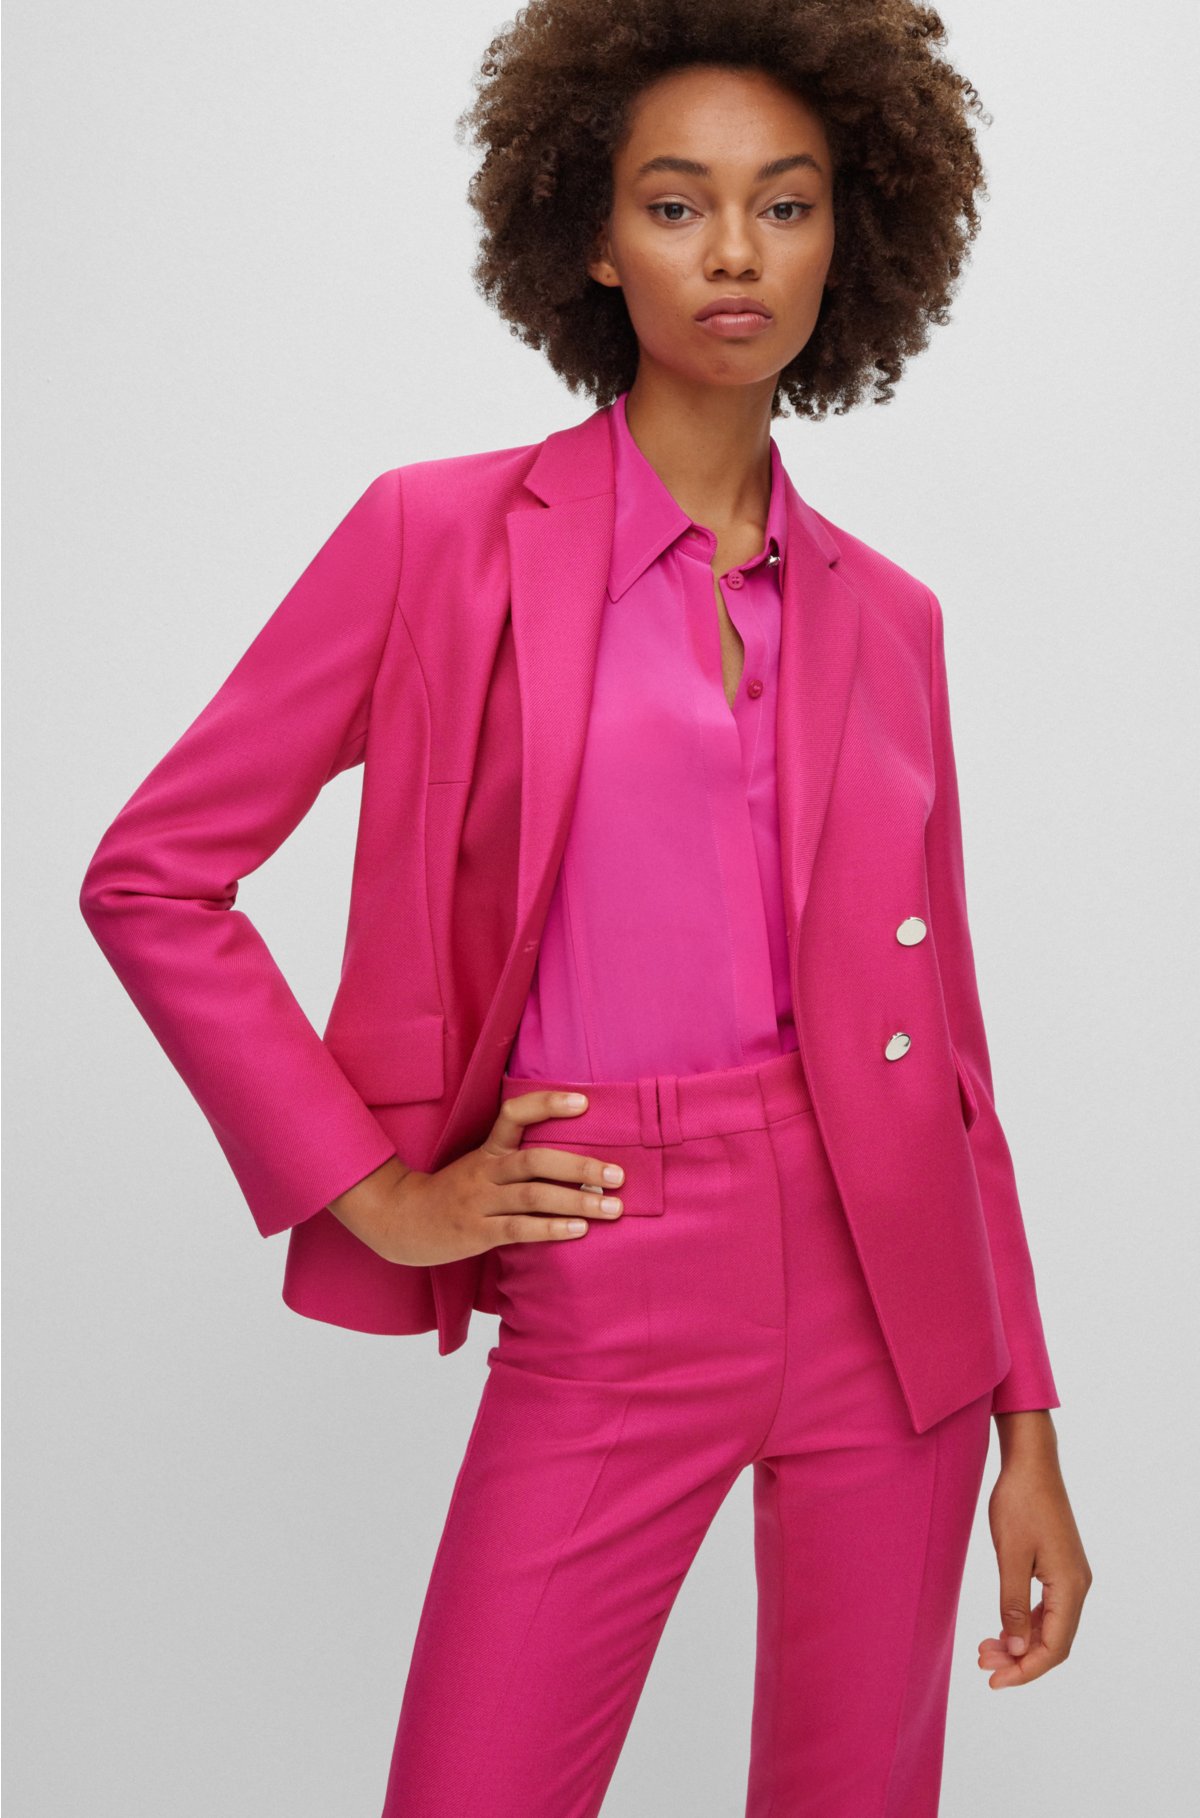 Hot Pink Pantsuit for Women, Pink Double-breasted Pantsuit for